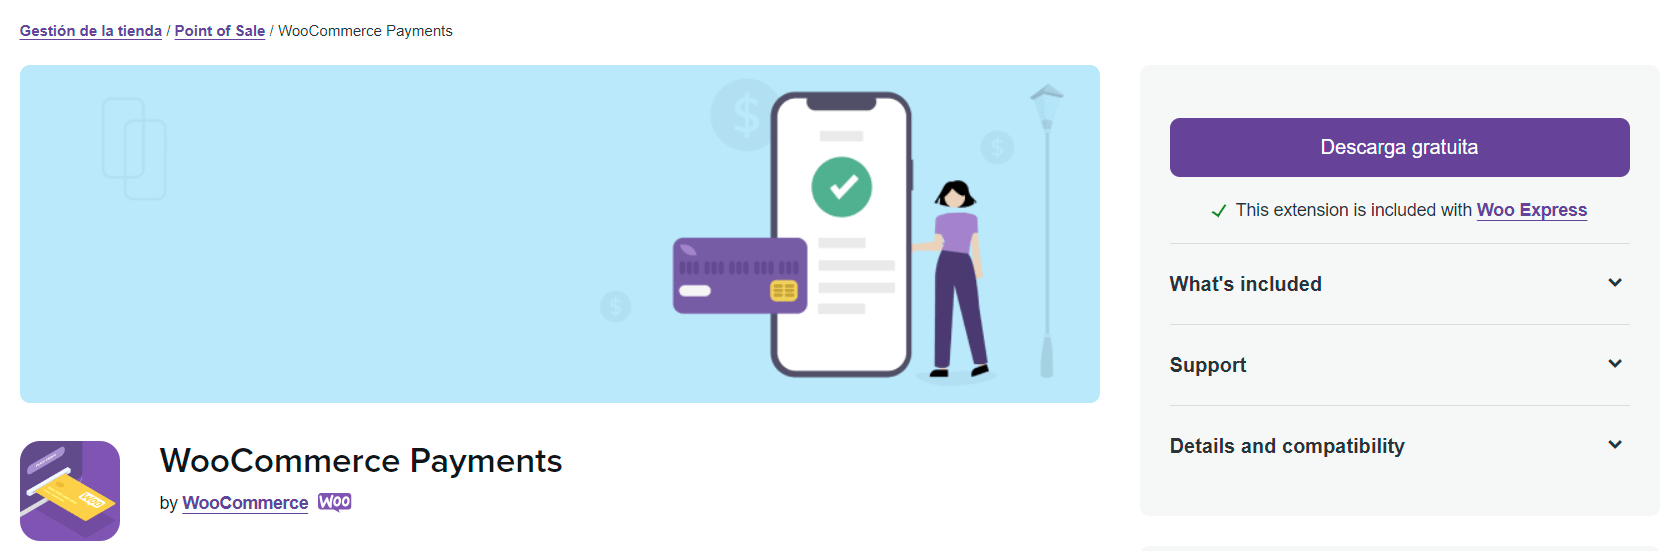 Plugin WooCommerce payments